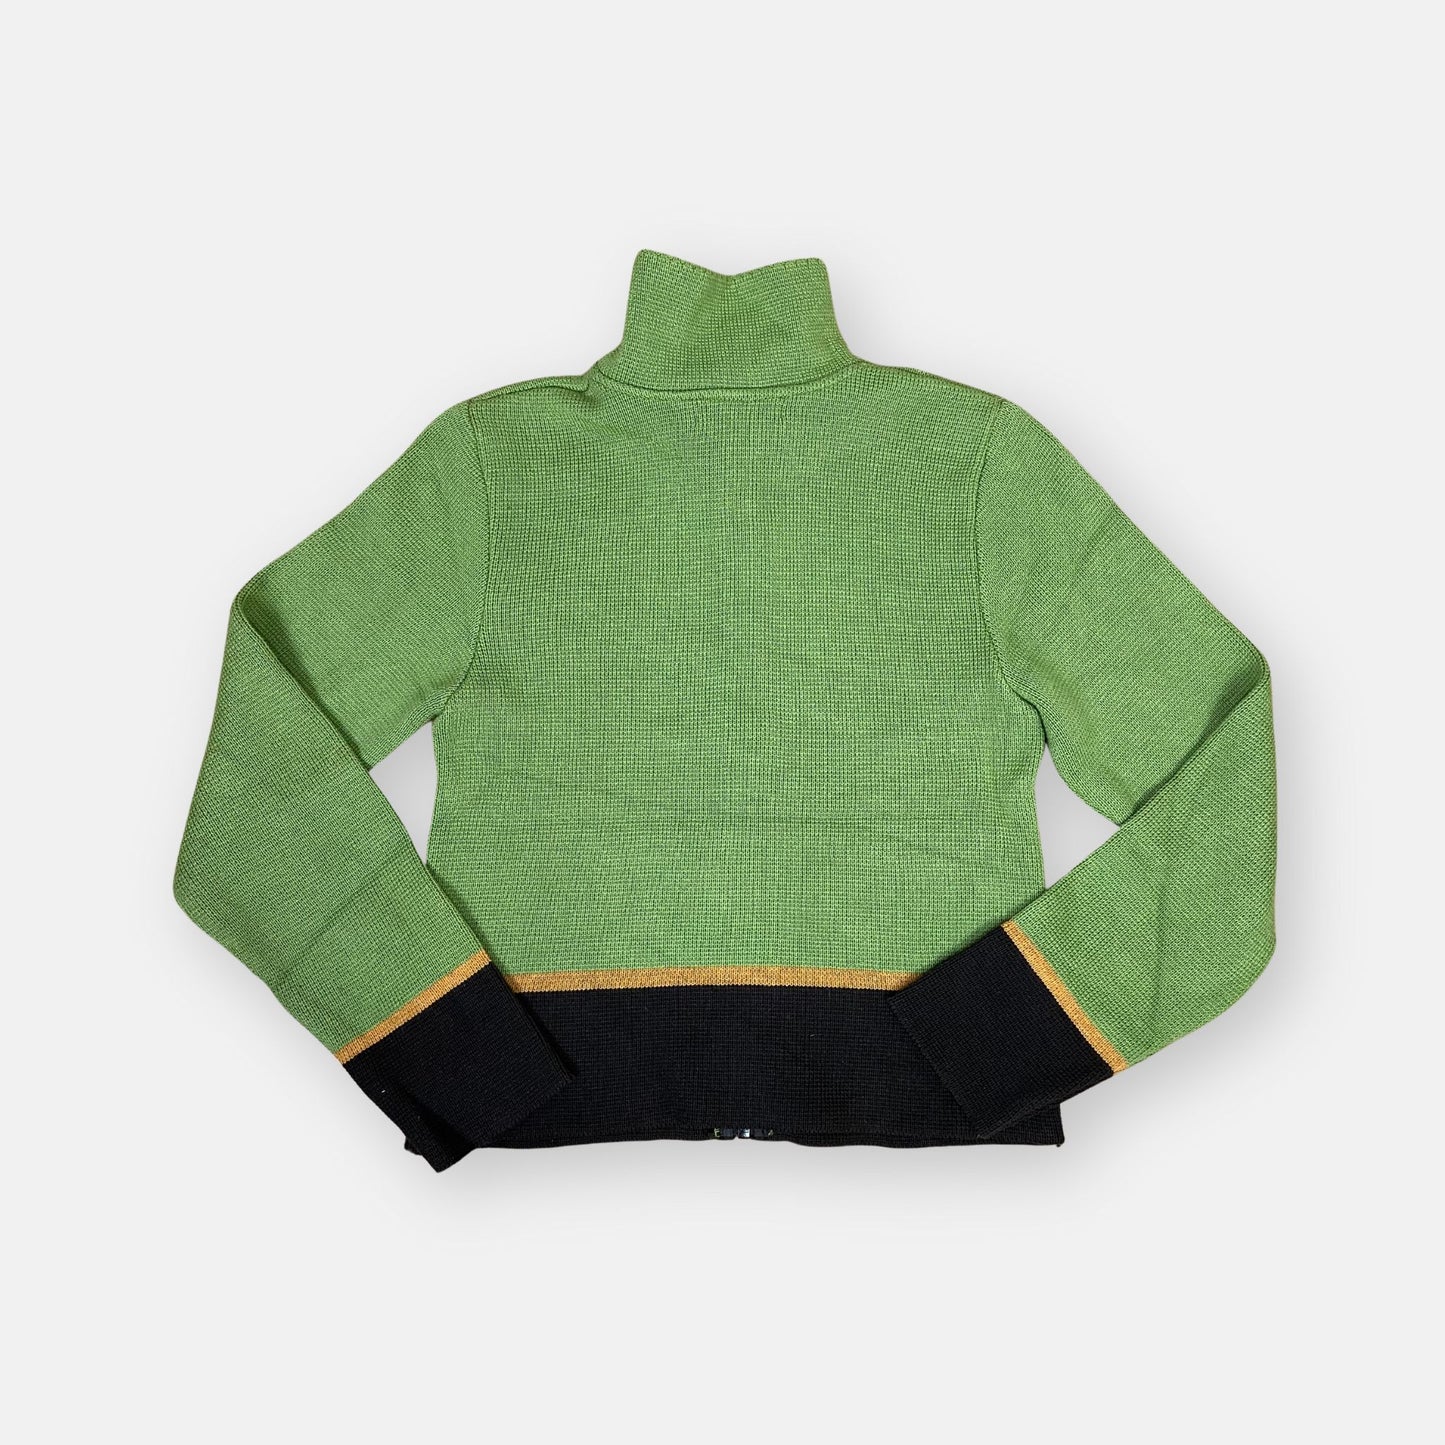 00s Green Zip Up Jumper - Size S